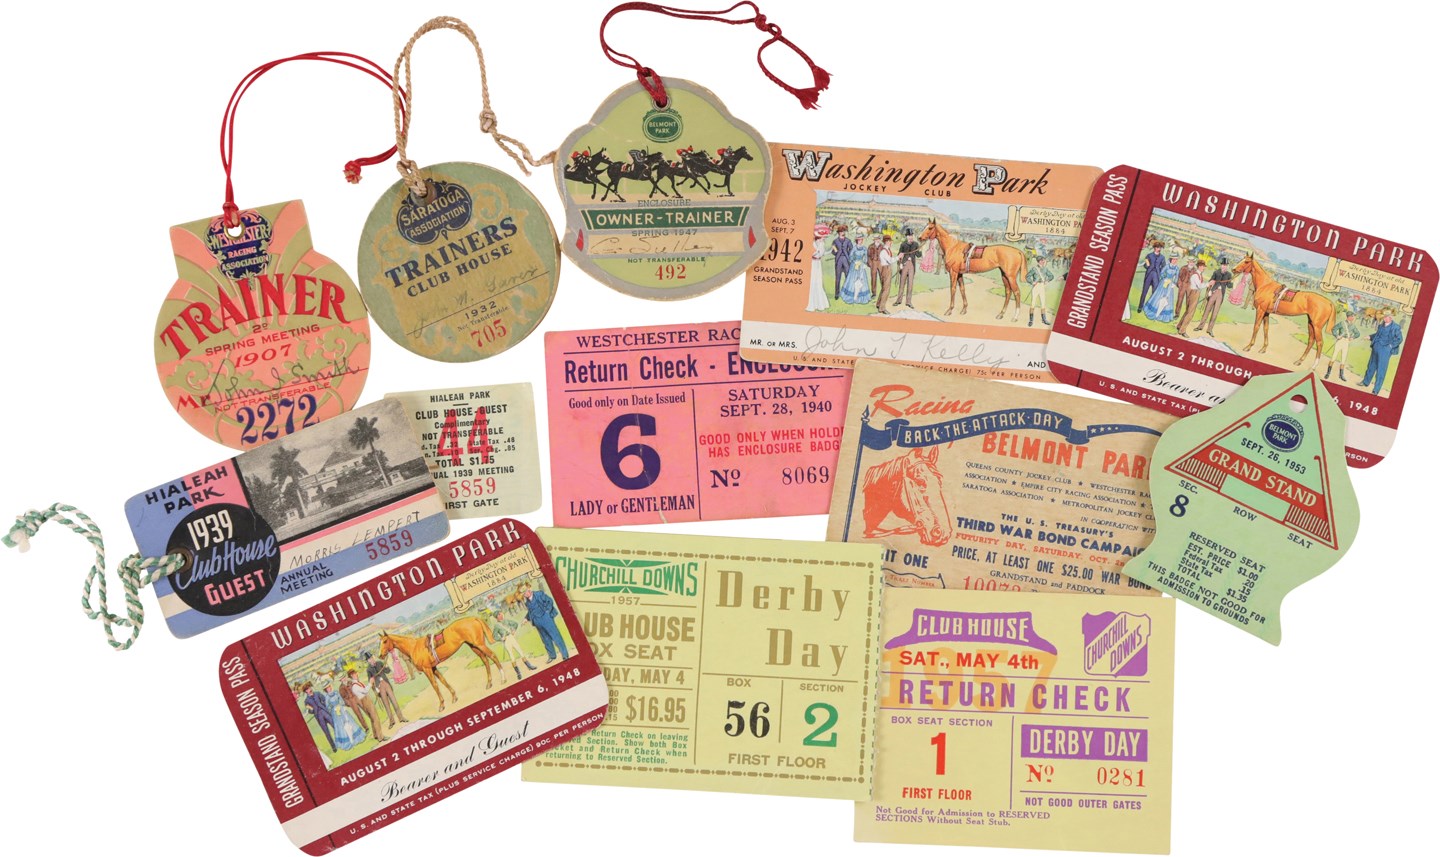 Horse Racing - Admission Tickets of Famous Horse Races and Races Including Triple Crown Races (20)